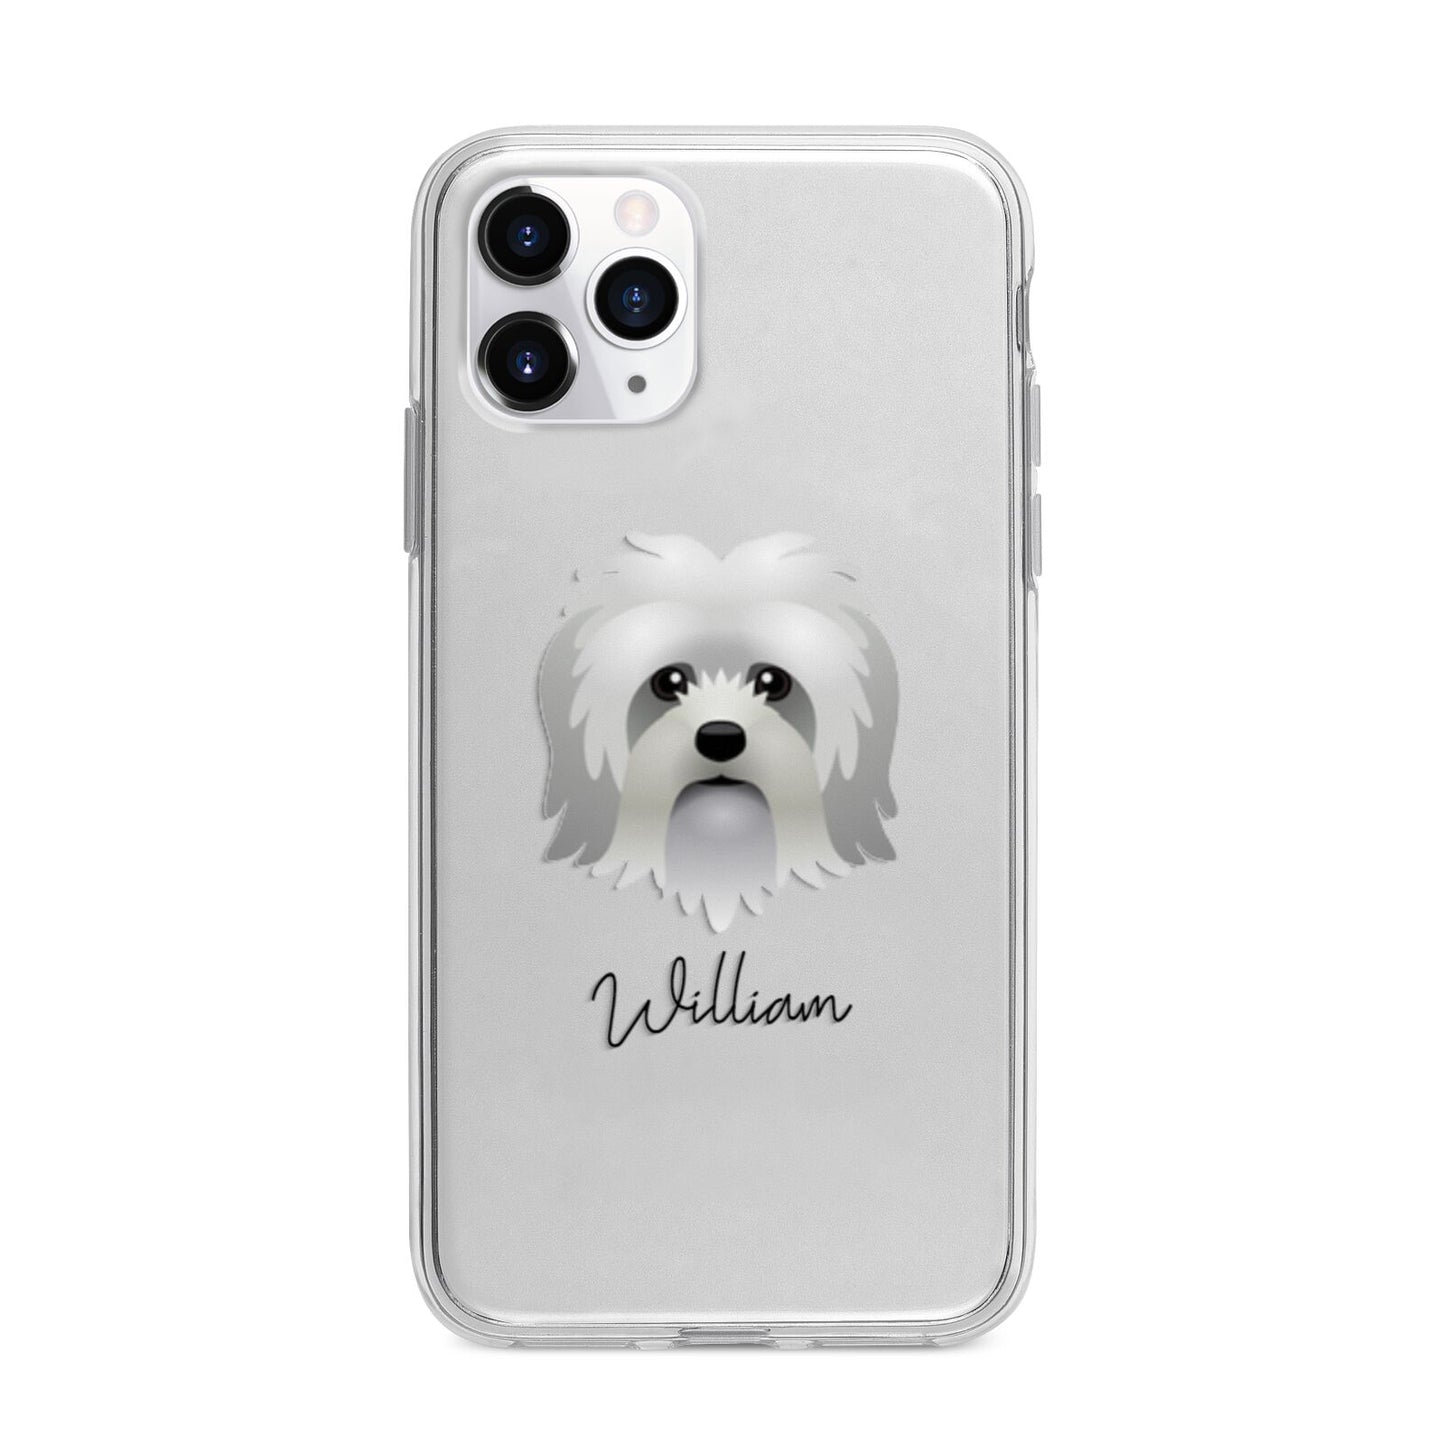 Lo wchen Personalised Apple iPhone 11 Pro in Silver with Bumper Case